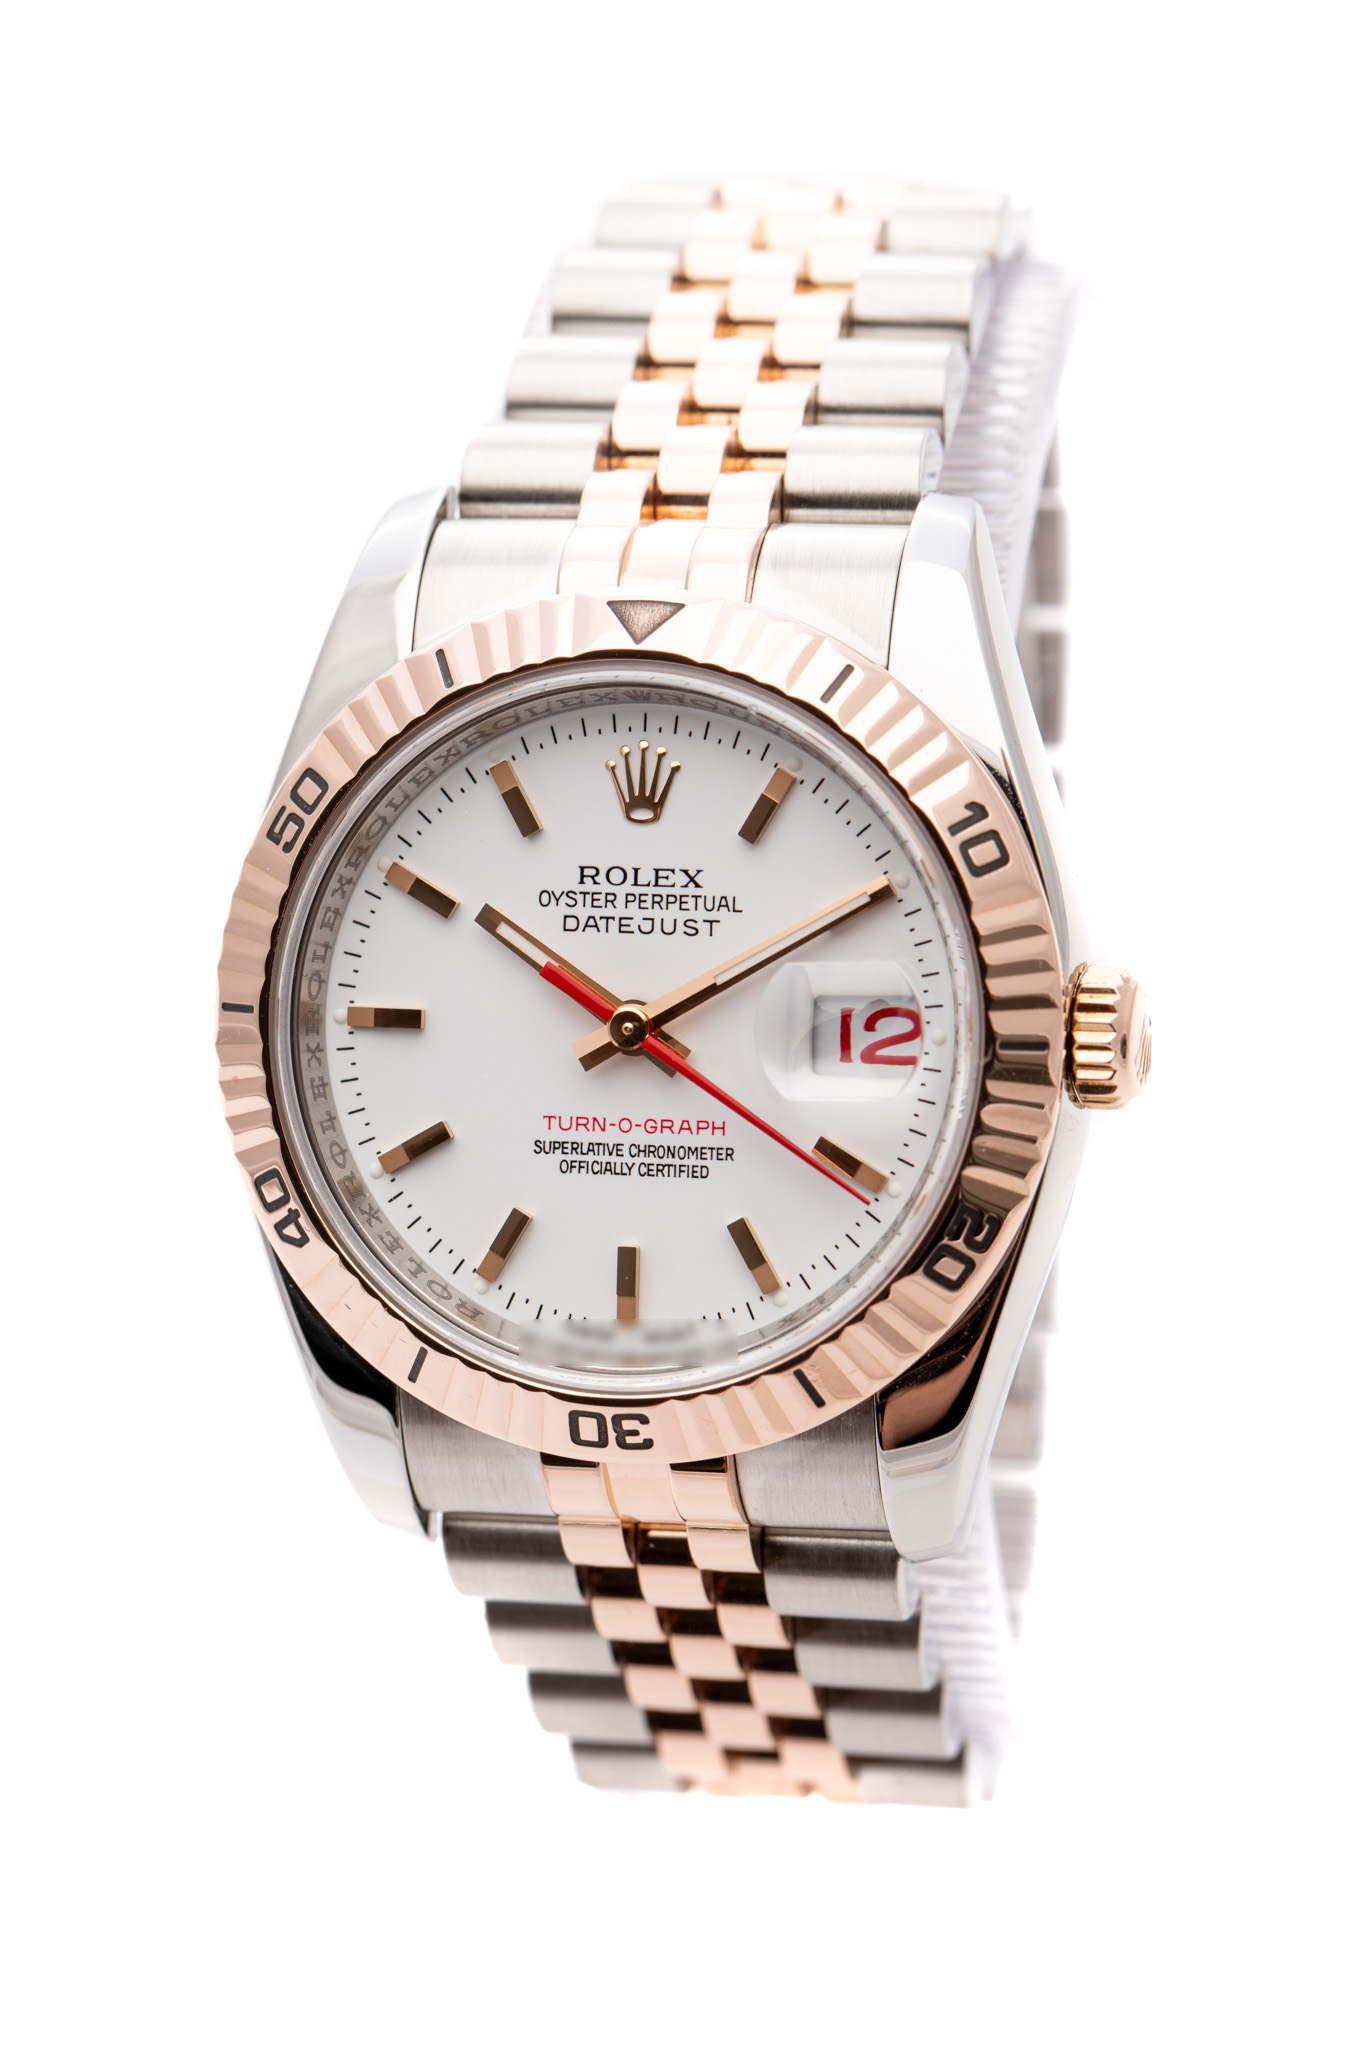 ROLEX DATEJUST TURN-O-GRAPH ROSE GOLD&STEEL 36MM AUTOMATIC REF: 116261